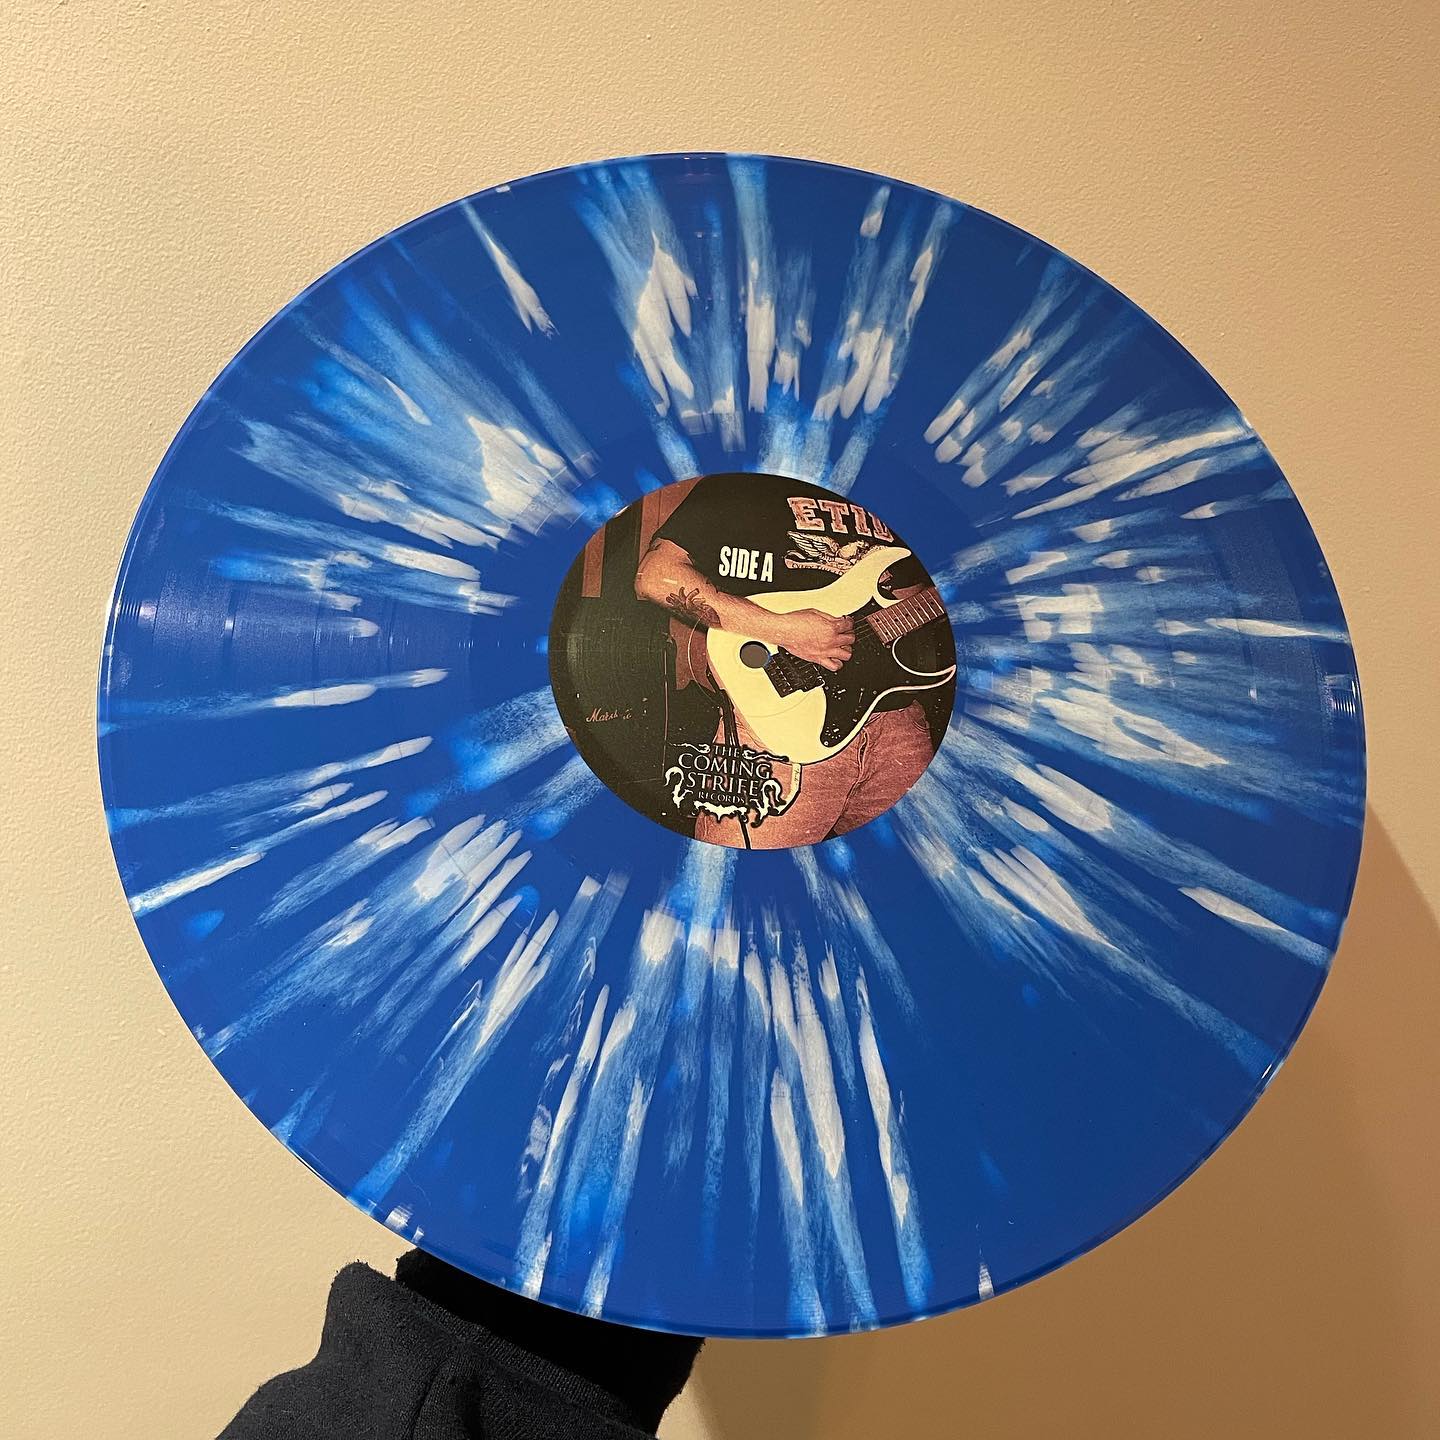 Realm of Torment - Ytene's Collapse 12"